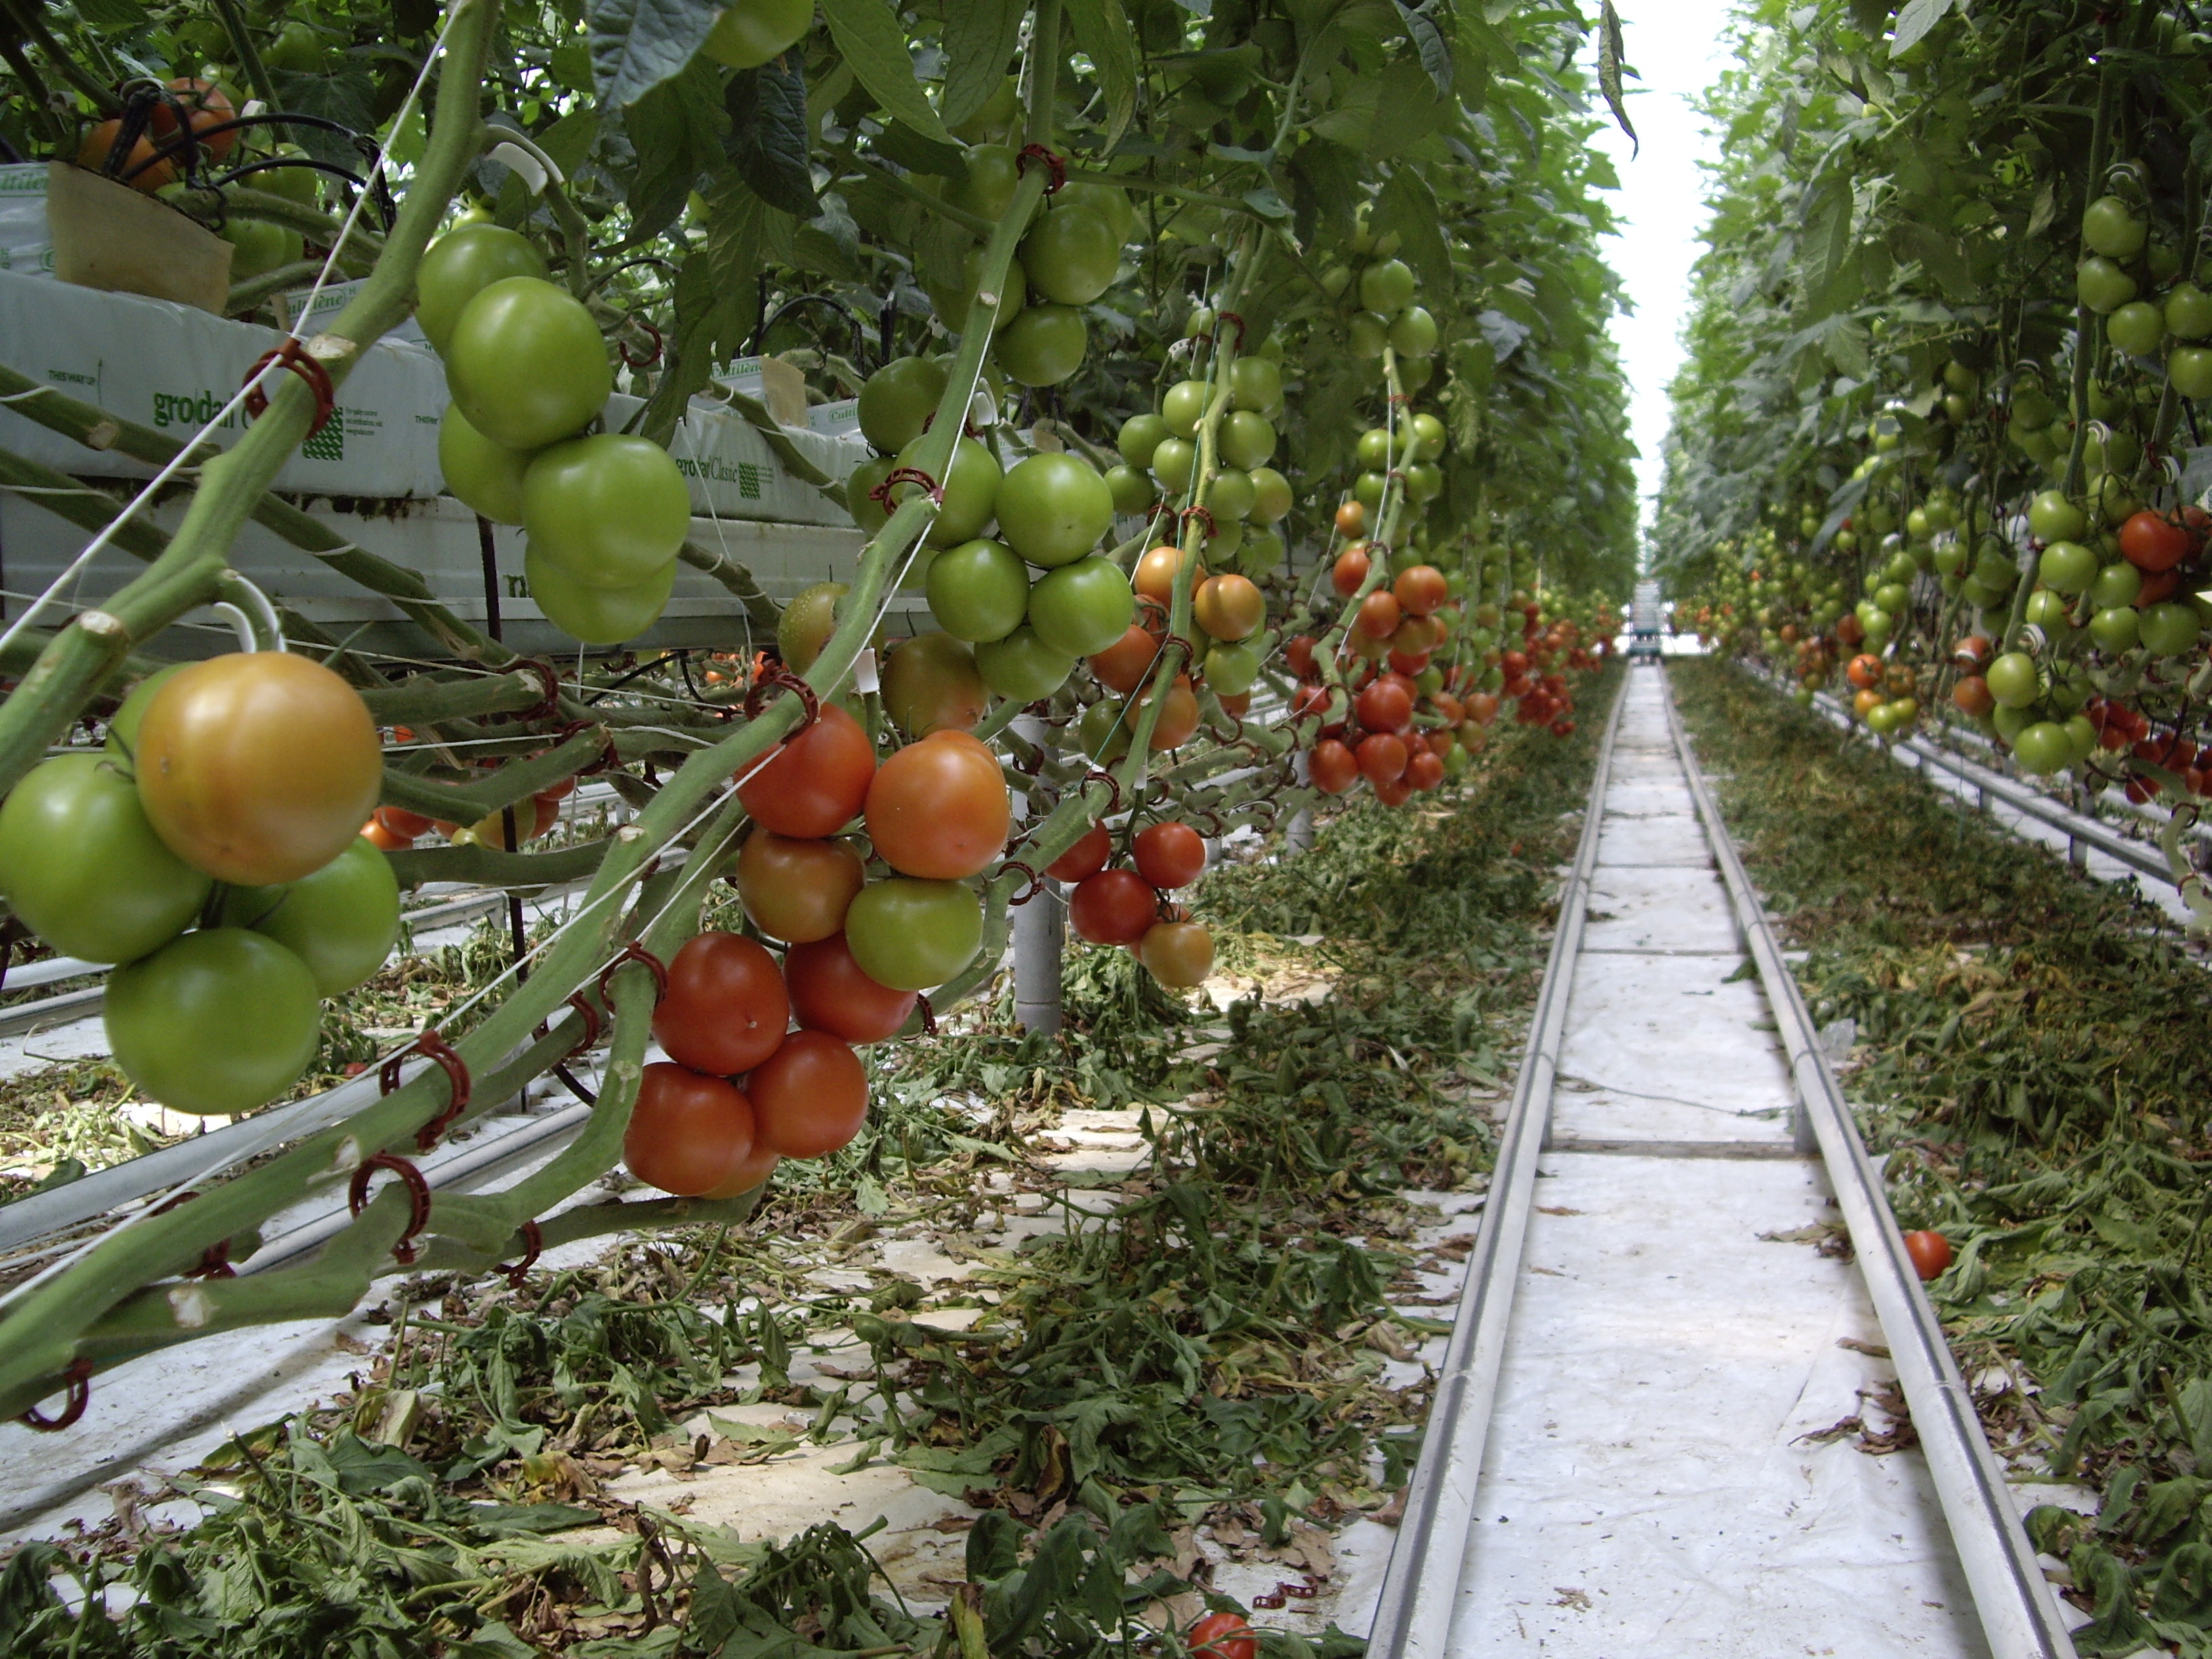 Azerbaijan to check agricultural products on site